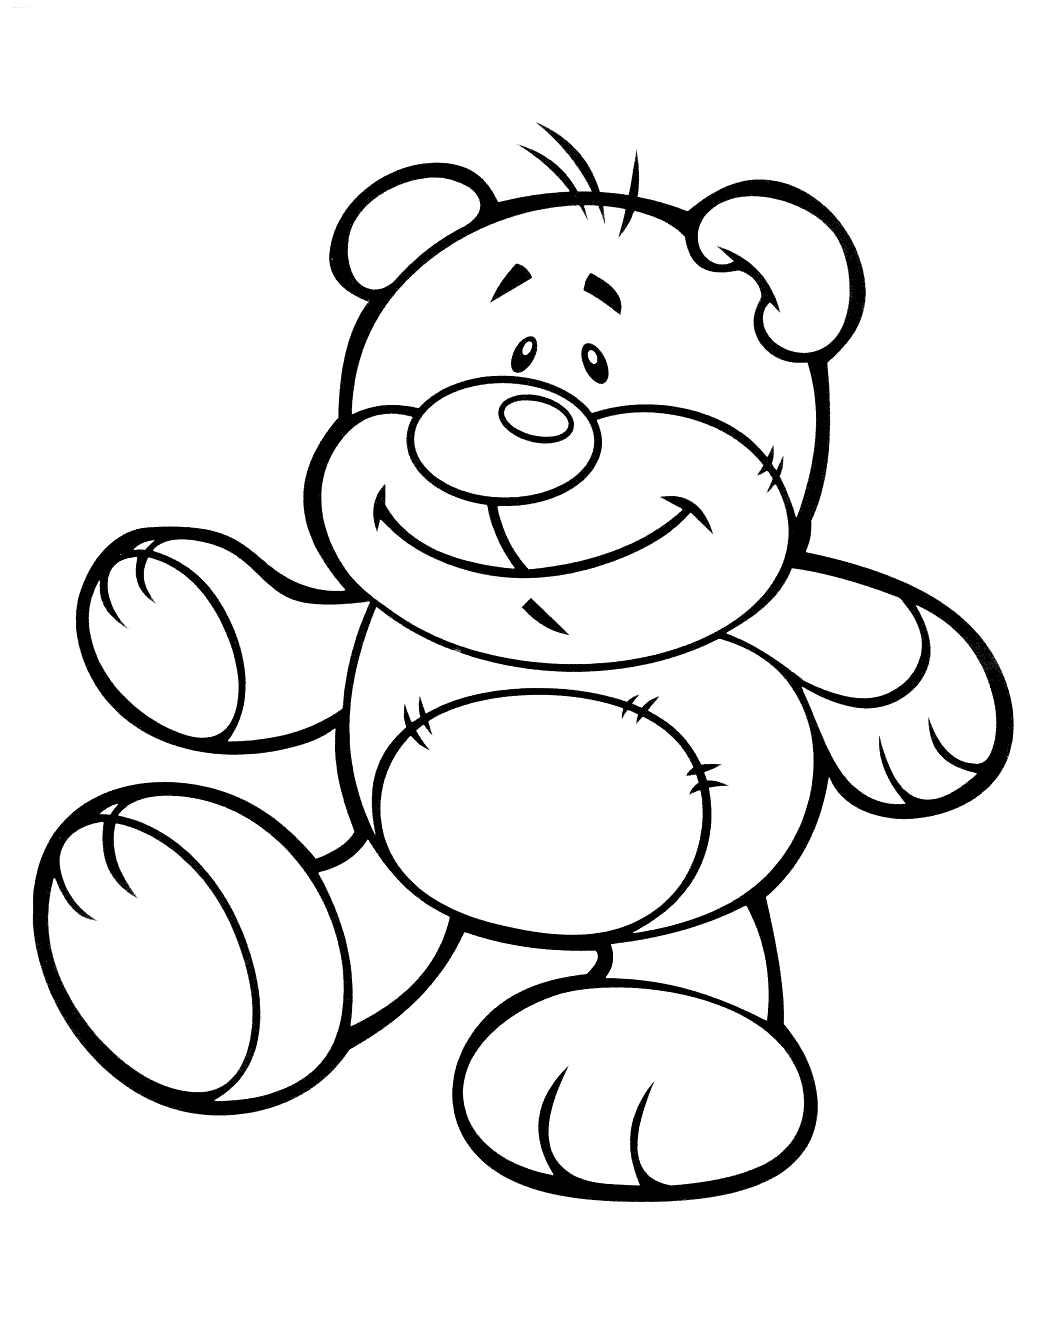 Coloring page   Teddy bear